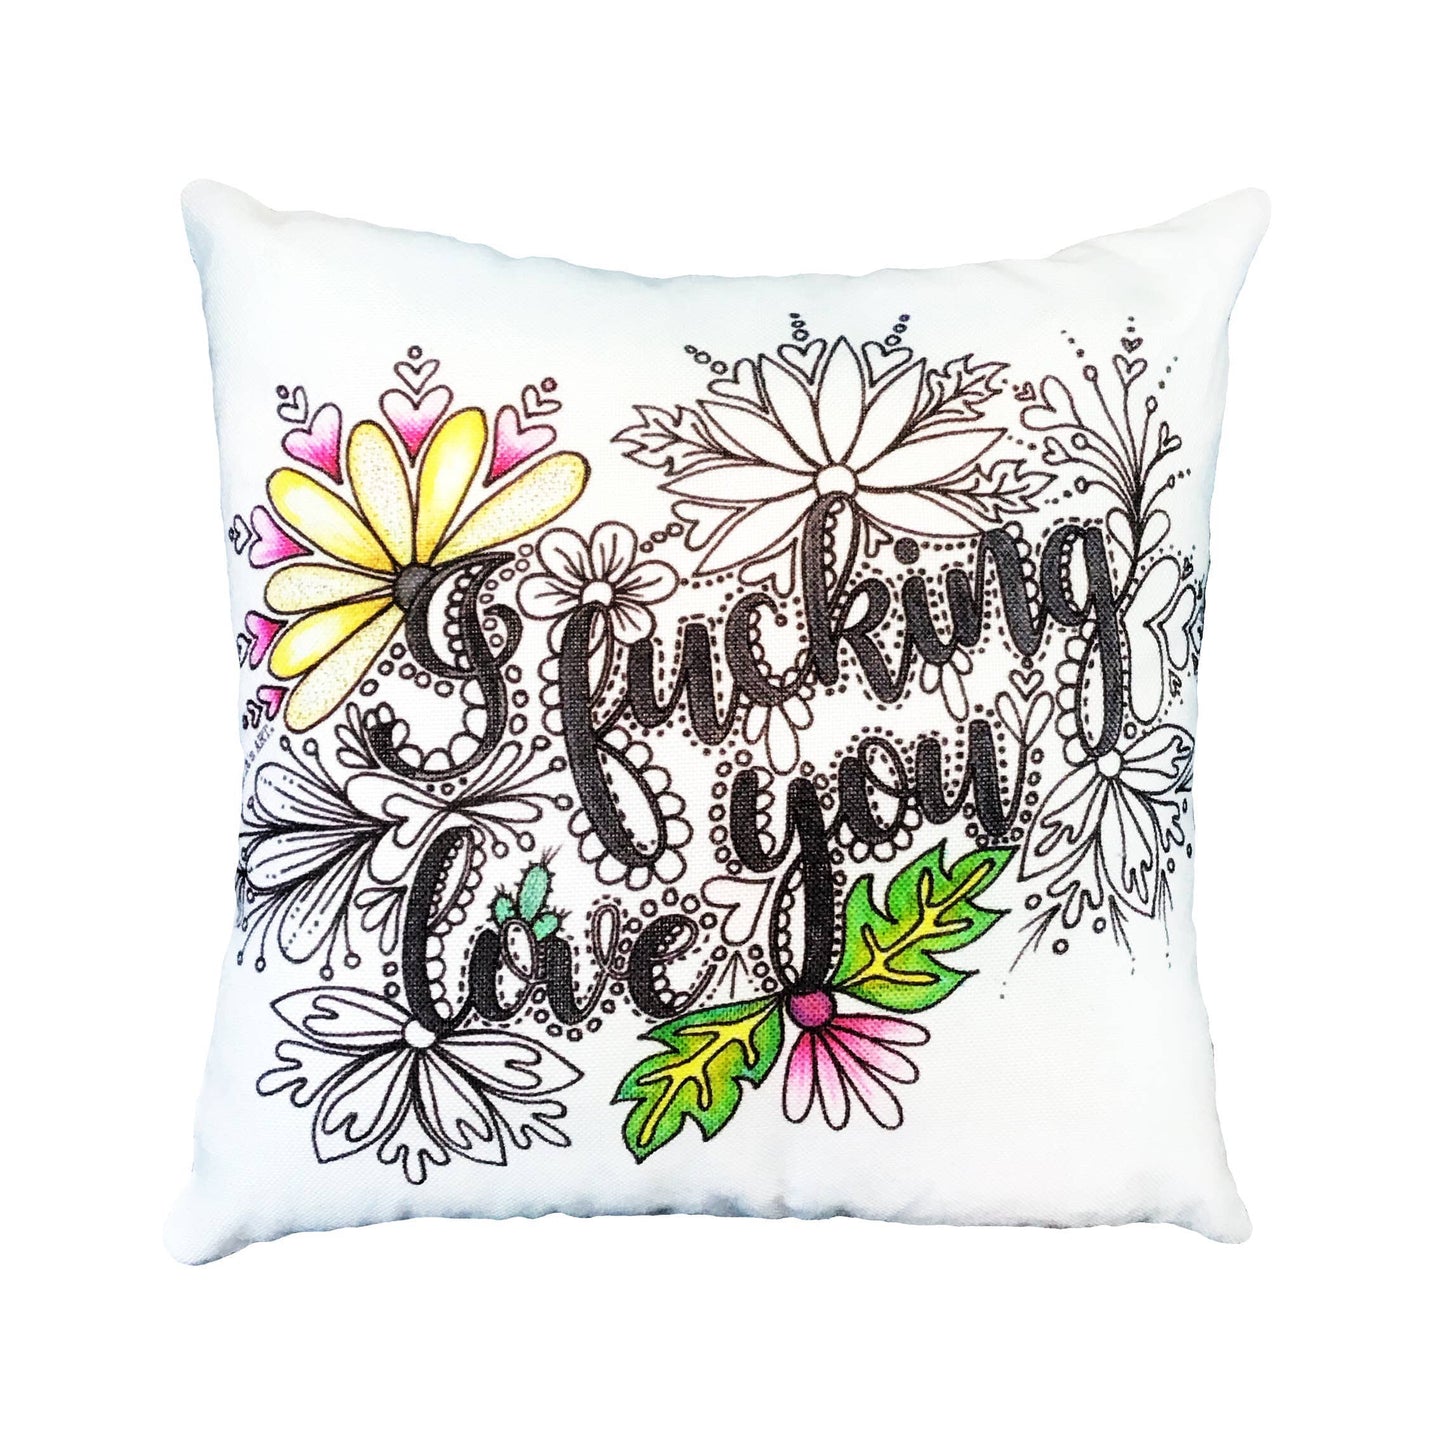 I Fucking Love You Throw Pillow Cover